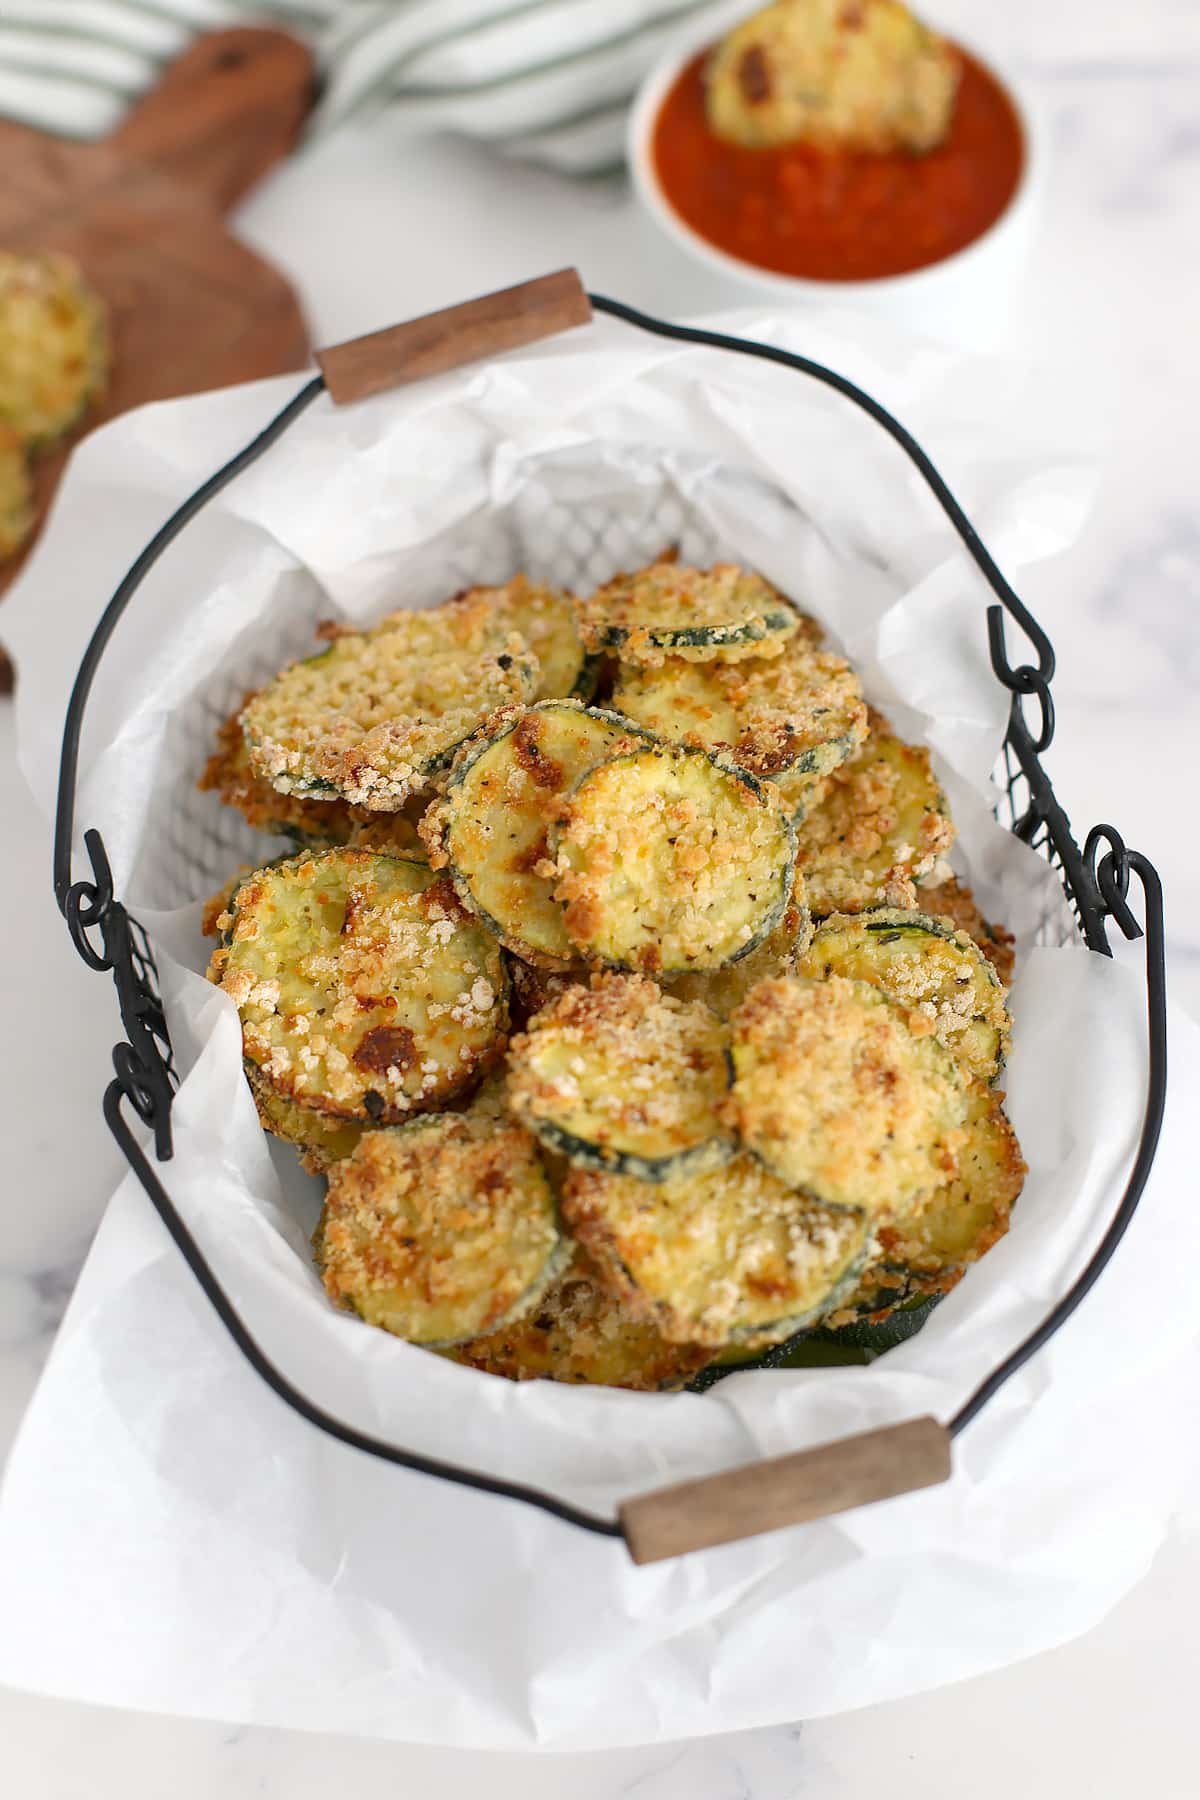 A parchment lined basket filled with crispy baked zucchini chips with a side of marinara sauce in a white bowl.